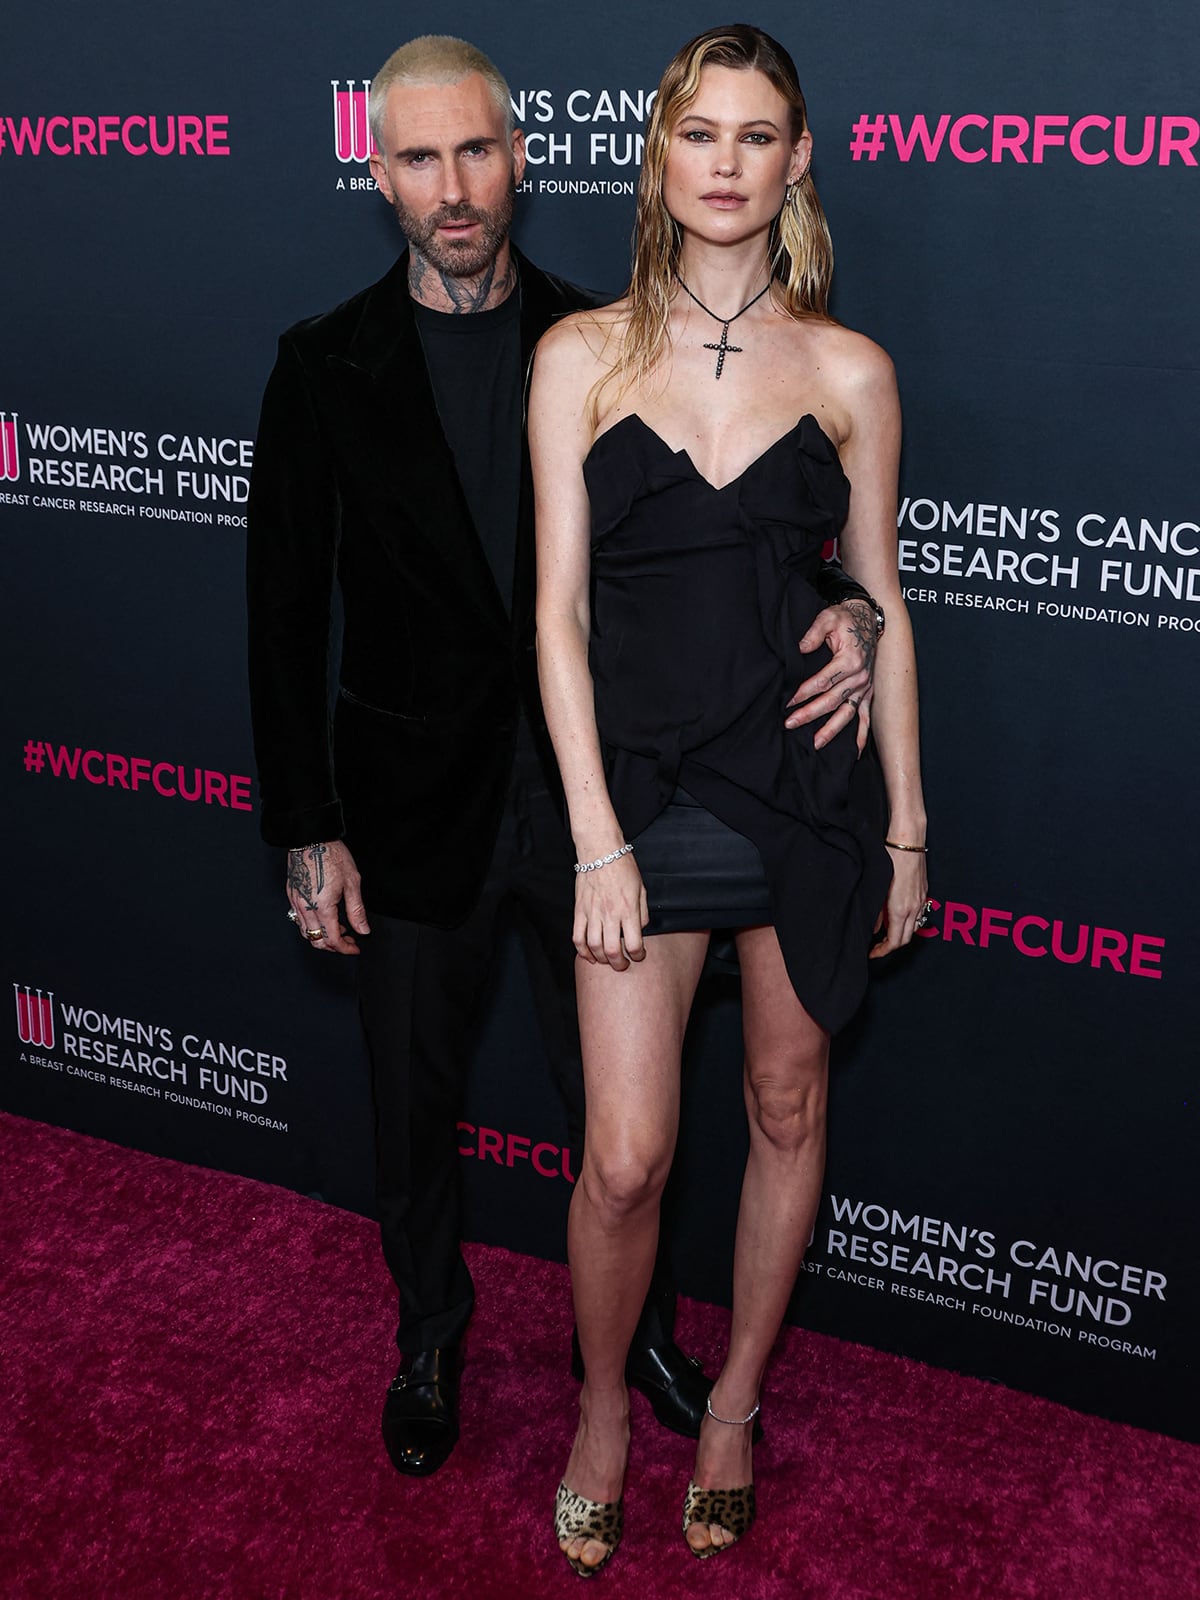 Adam Levine and Behati Prinsloo wear coordinating black outfits, with Levine in a velvet jacket and Prinsloo in an archival Vivienne Westwood mini dress